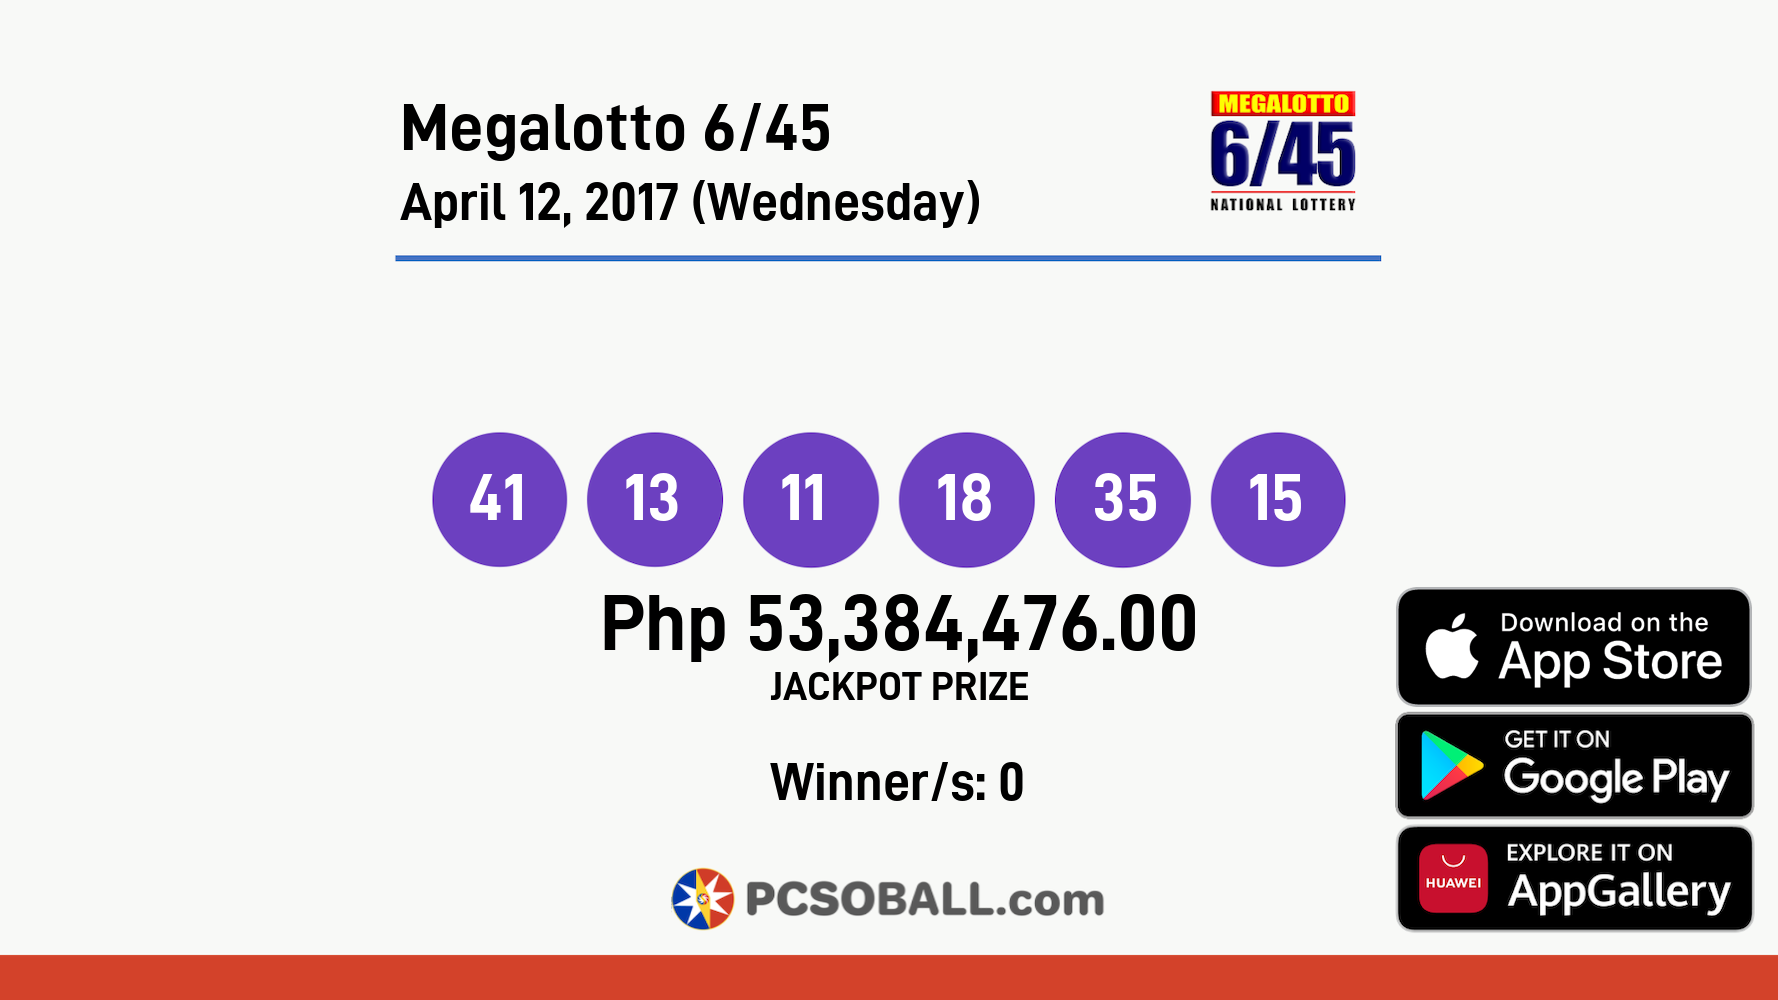 Megalotto 6/45 April 12, 2017 (Wednesday) Result